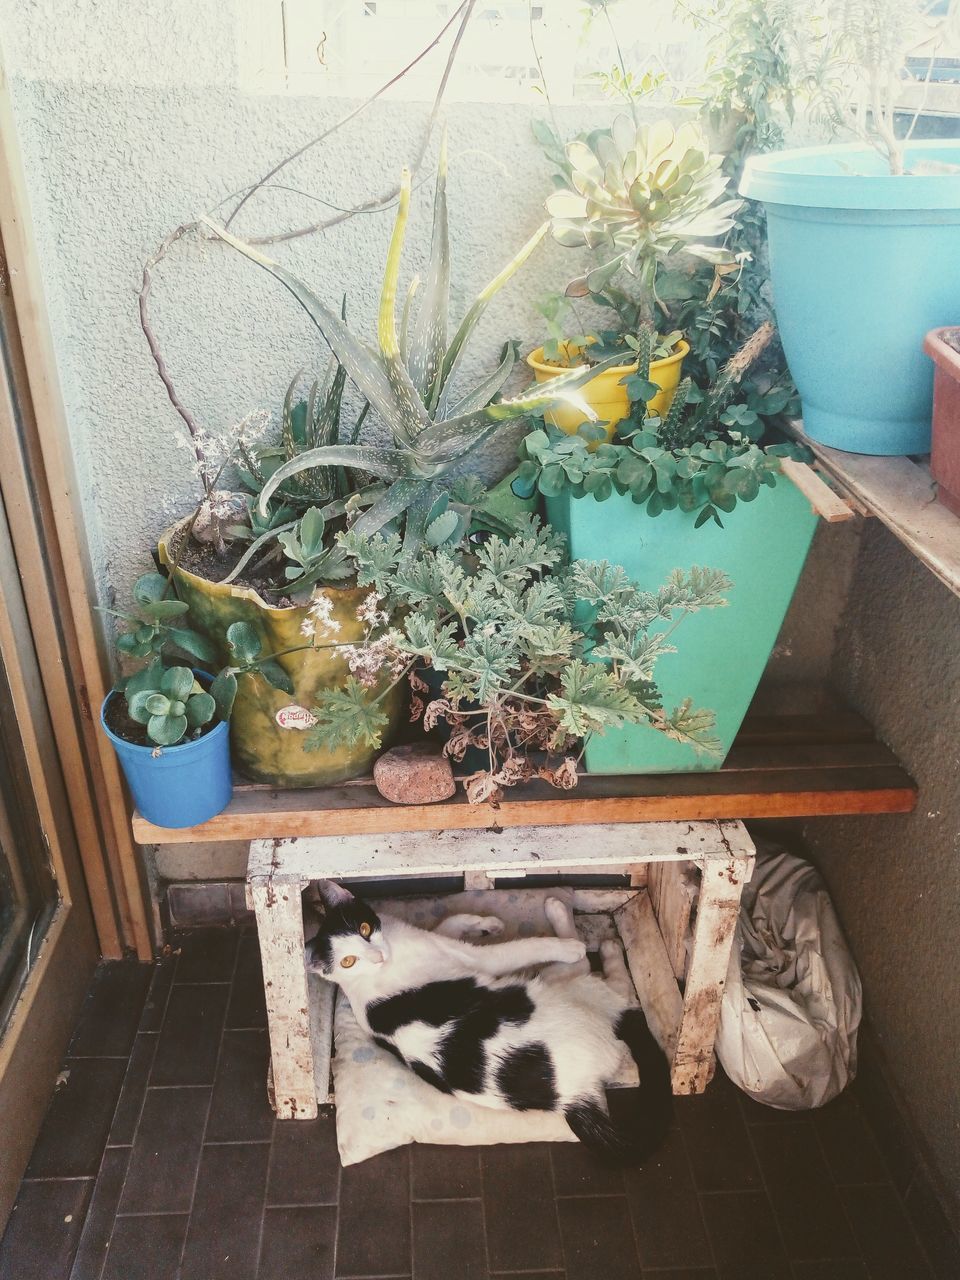 HIGH ANGLE VIEW OF CAT BY POTTED PLANTS